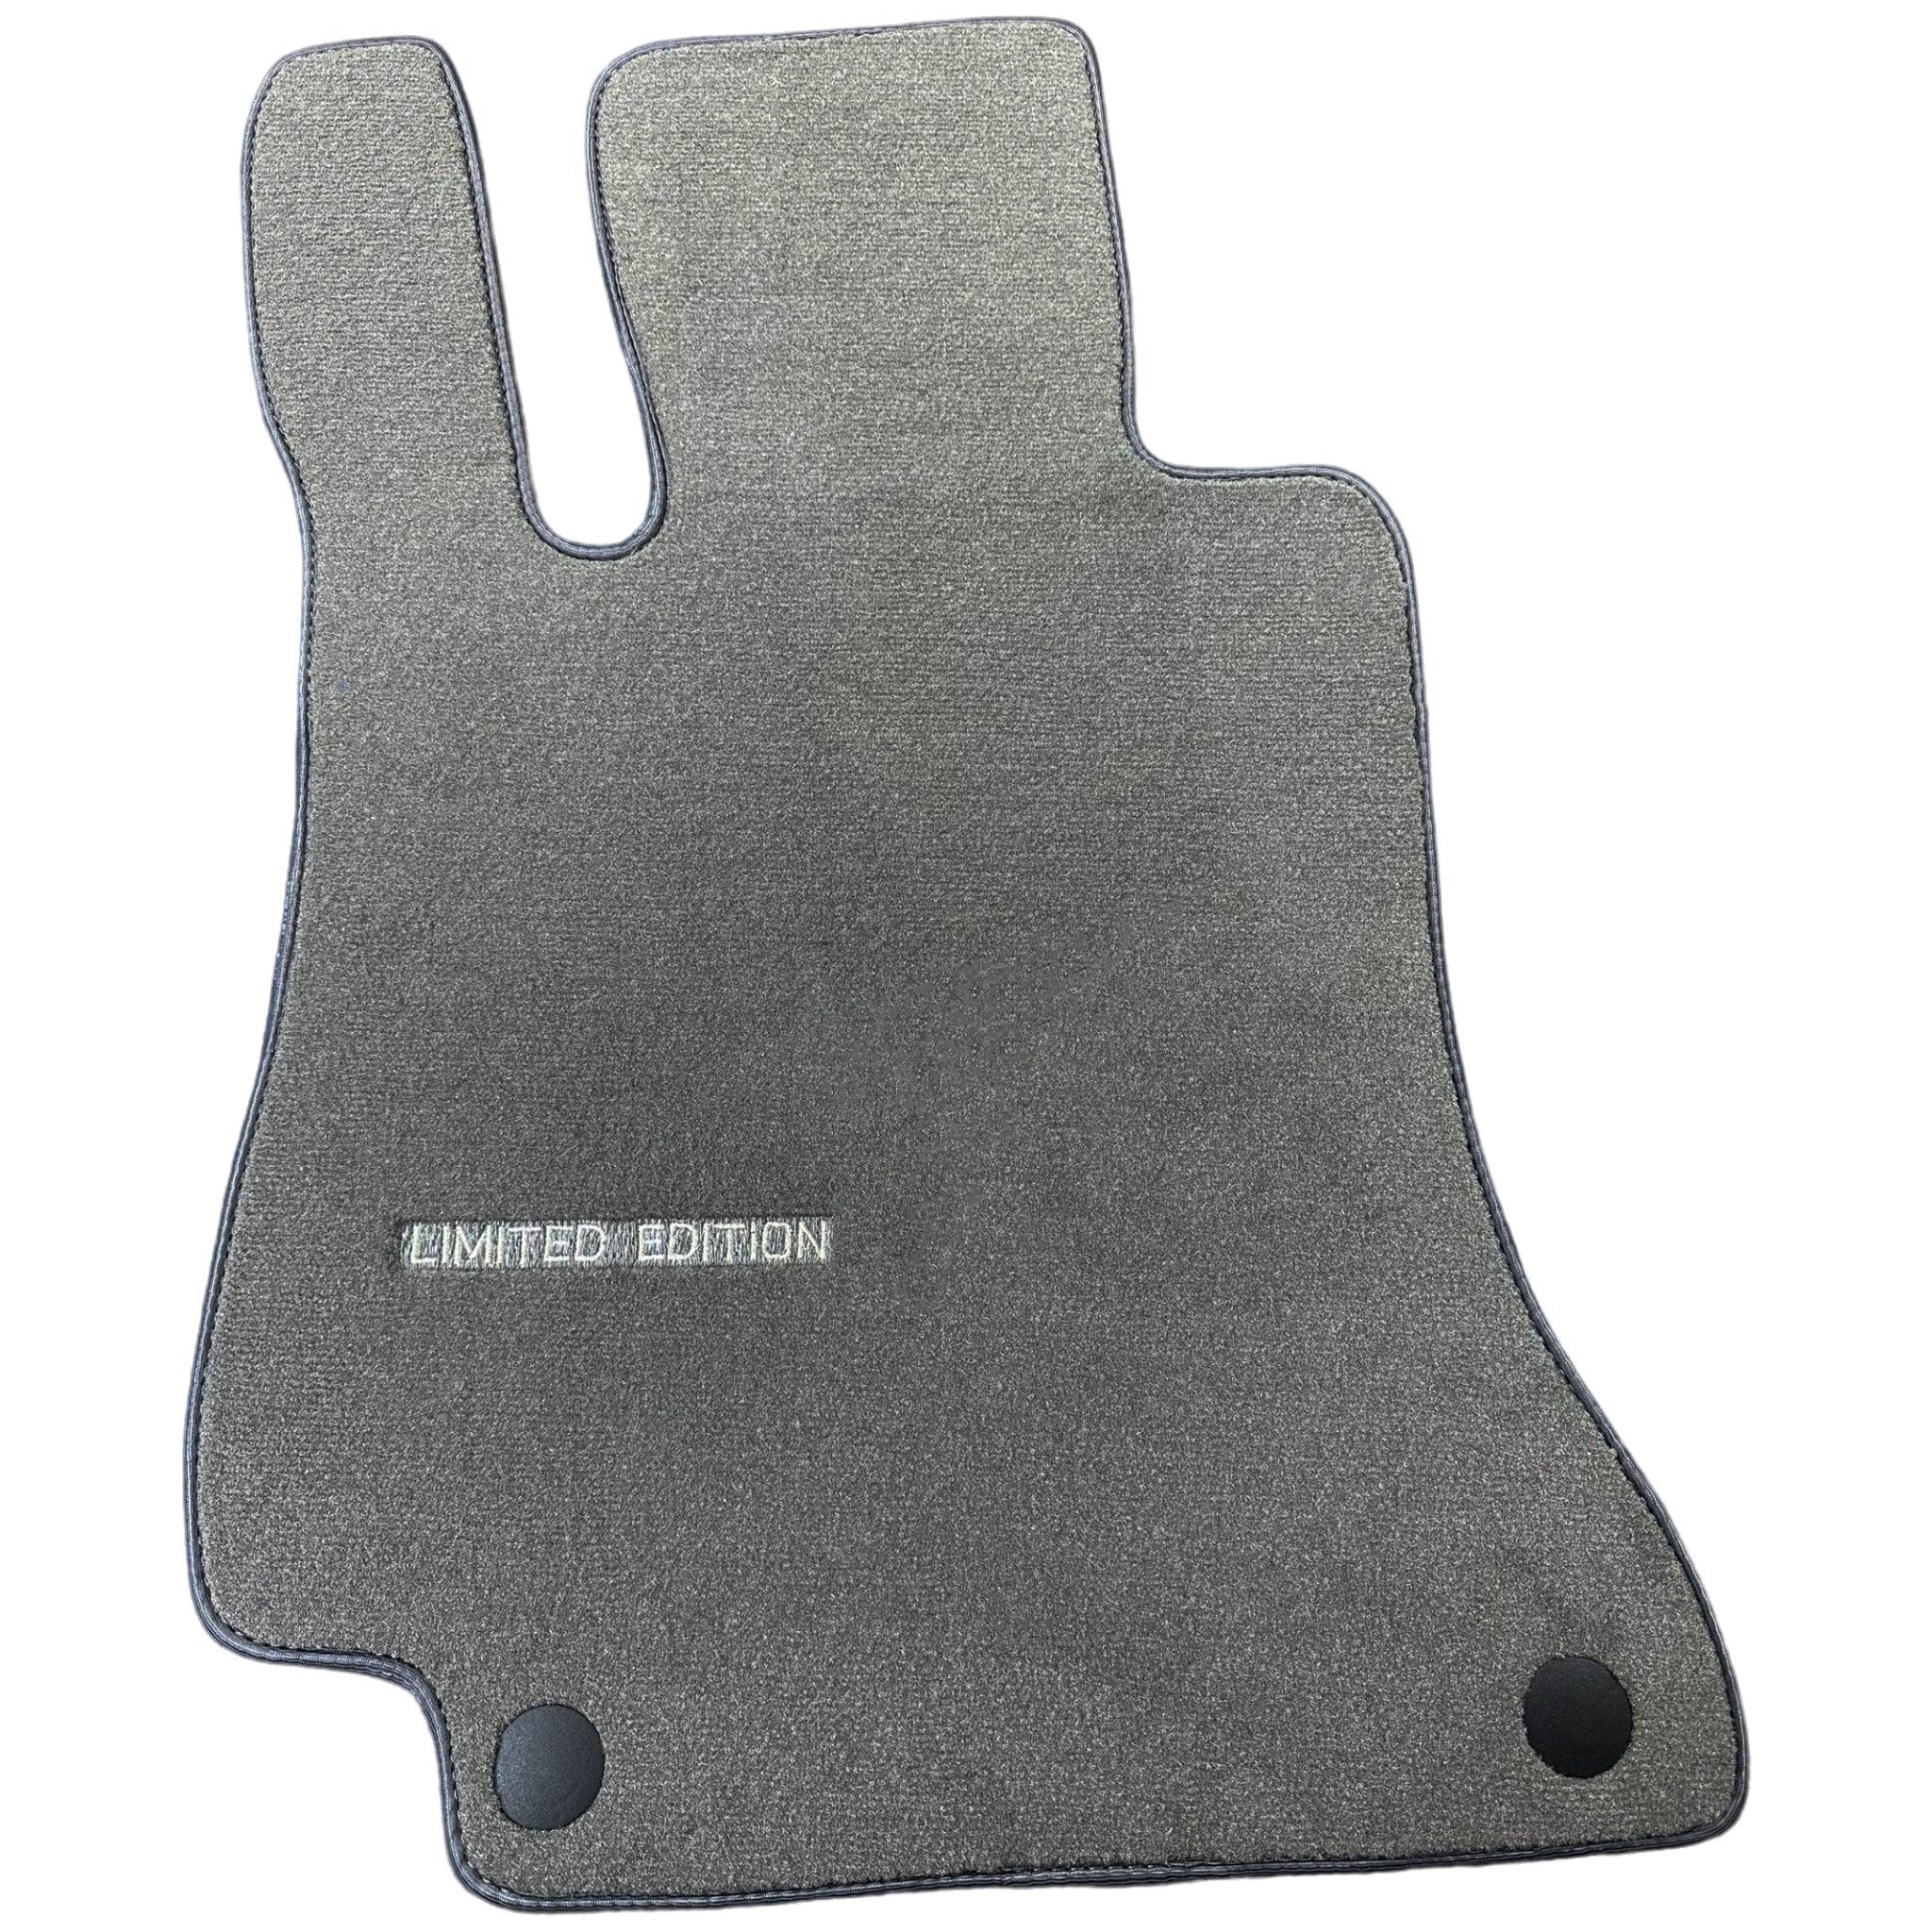 Gray Floor Mats For Mercedes Benz S-Class W126 (1979-1991) | Limited Edition